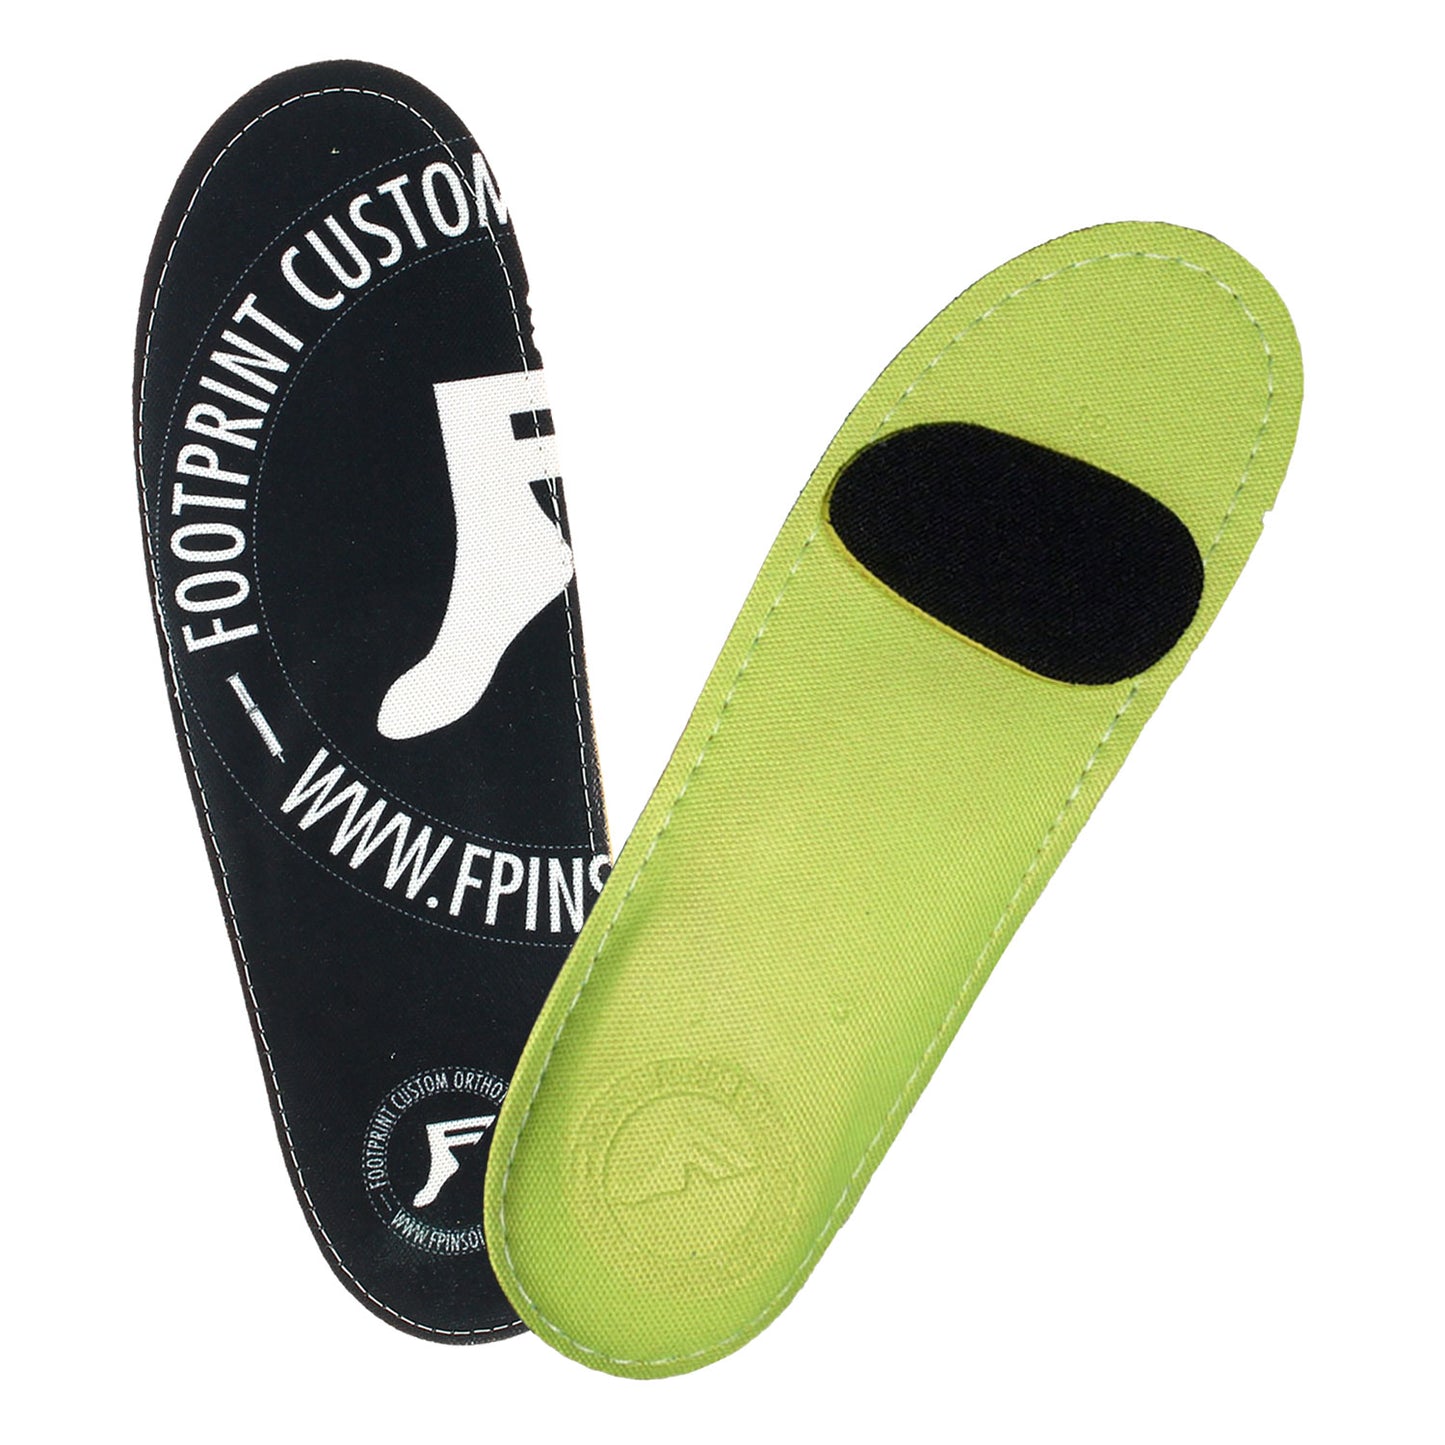 Gamechanger orthotics top and bottom view